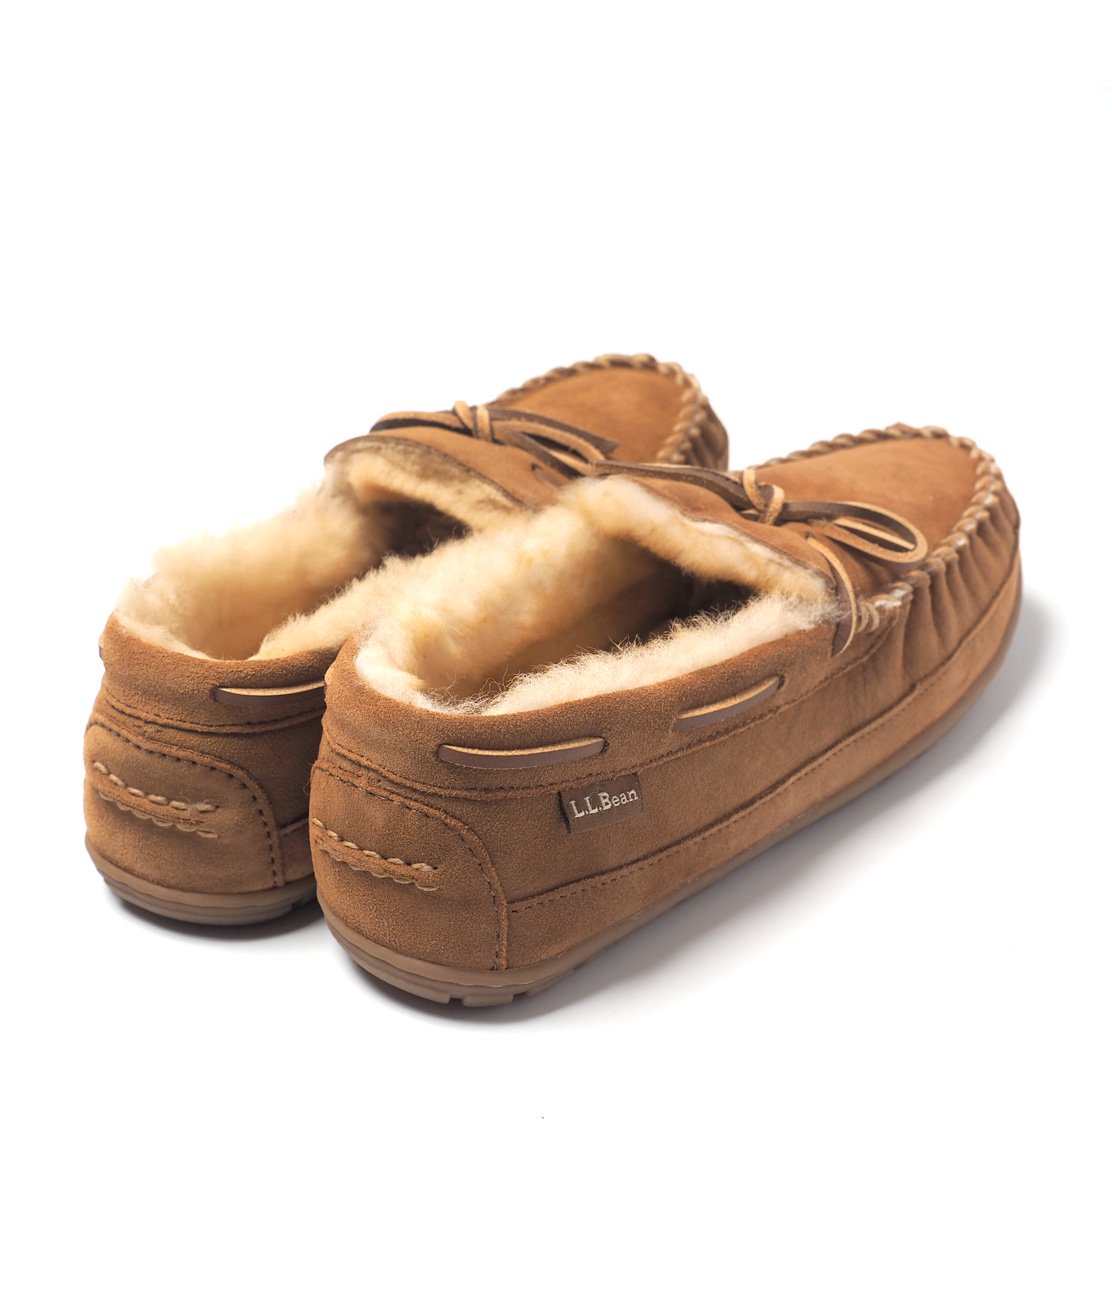 L.L.Bean】WICKED GOOD SLIPPER MOCCASINS - BROWN モカシンシューズ 